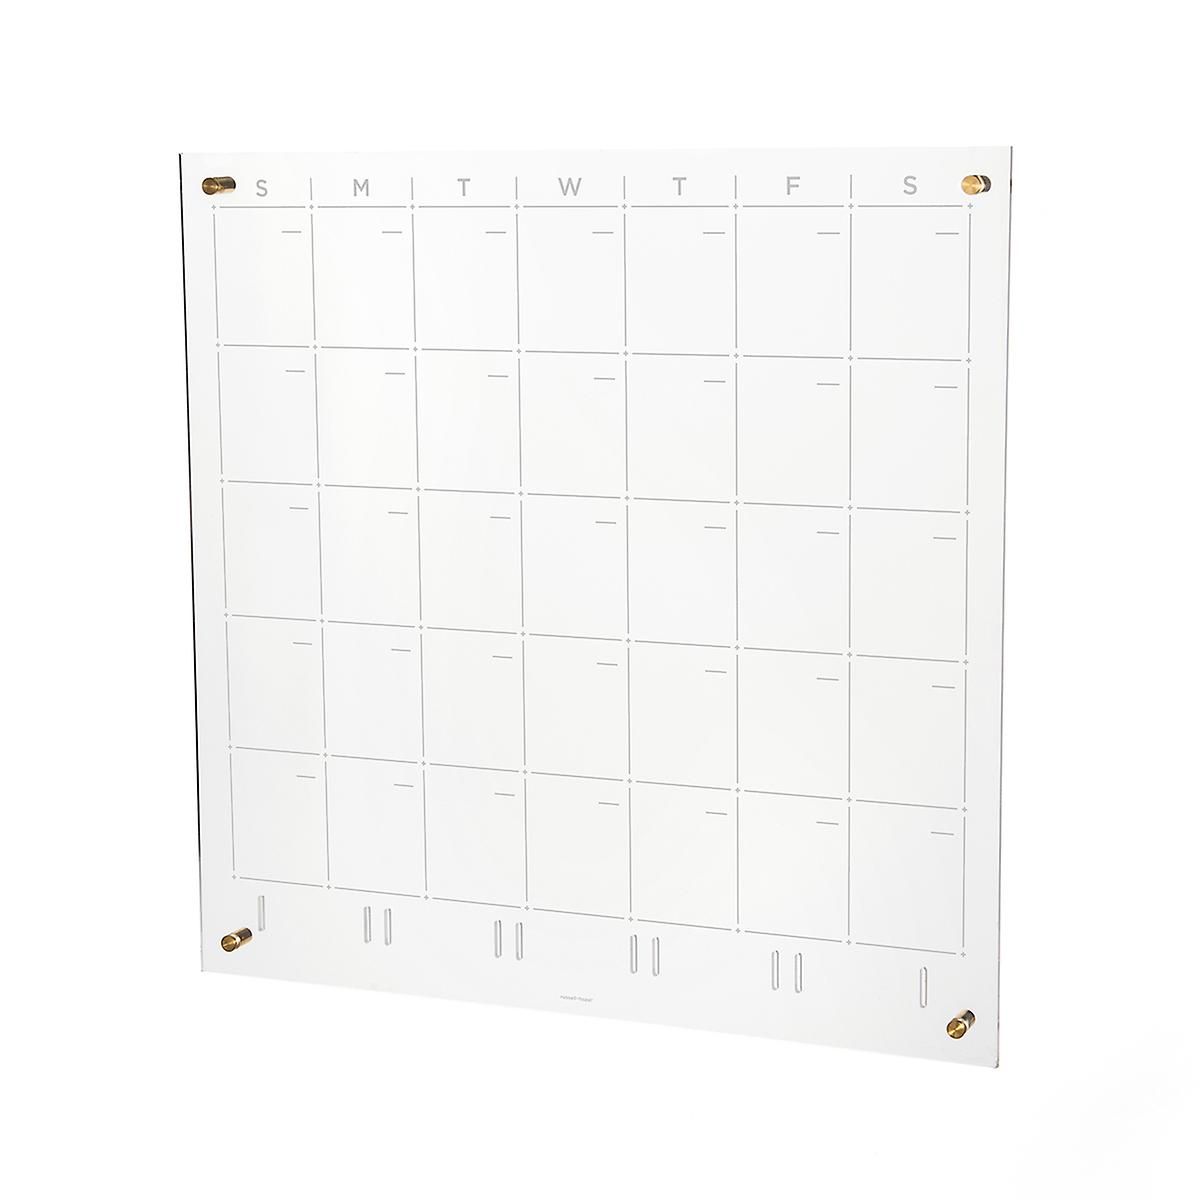 Russell + Hazel Acrylic Clear Monthly Calendar | The Container Store